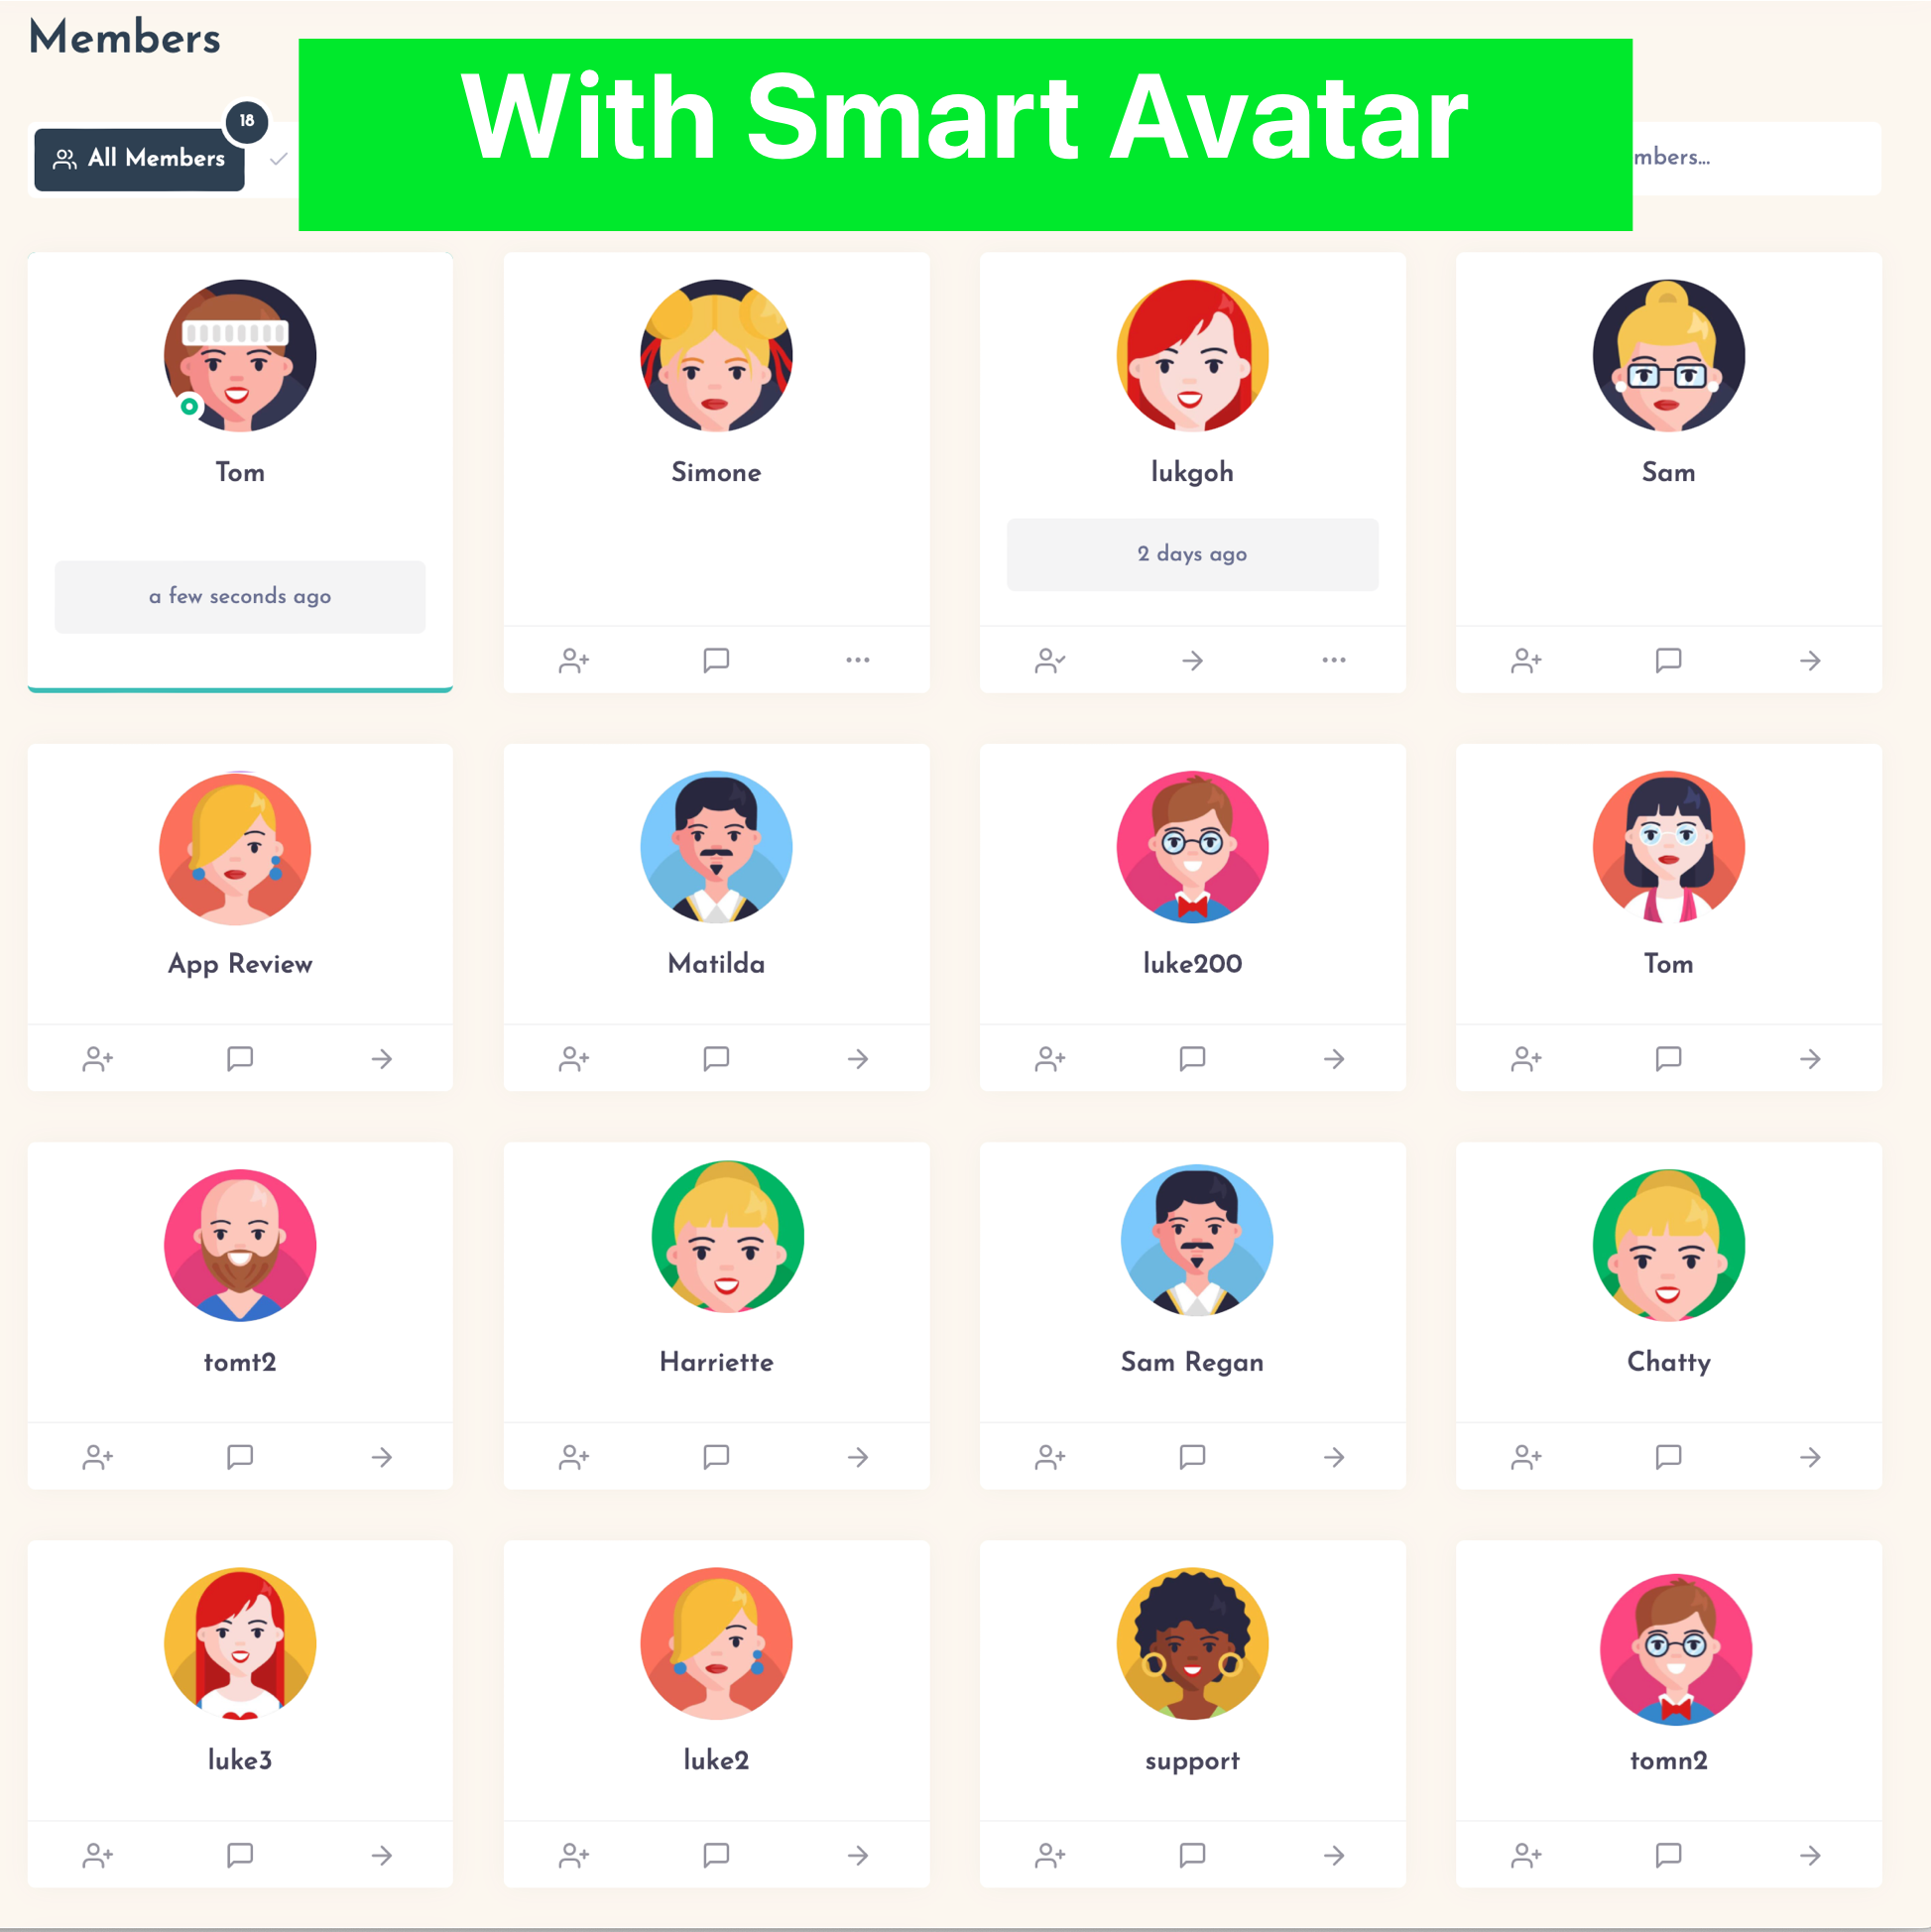 The members view with Smart Avatars.